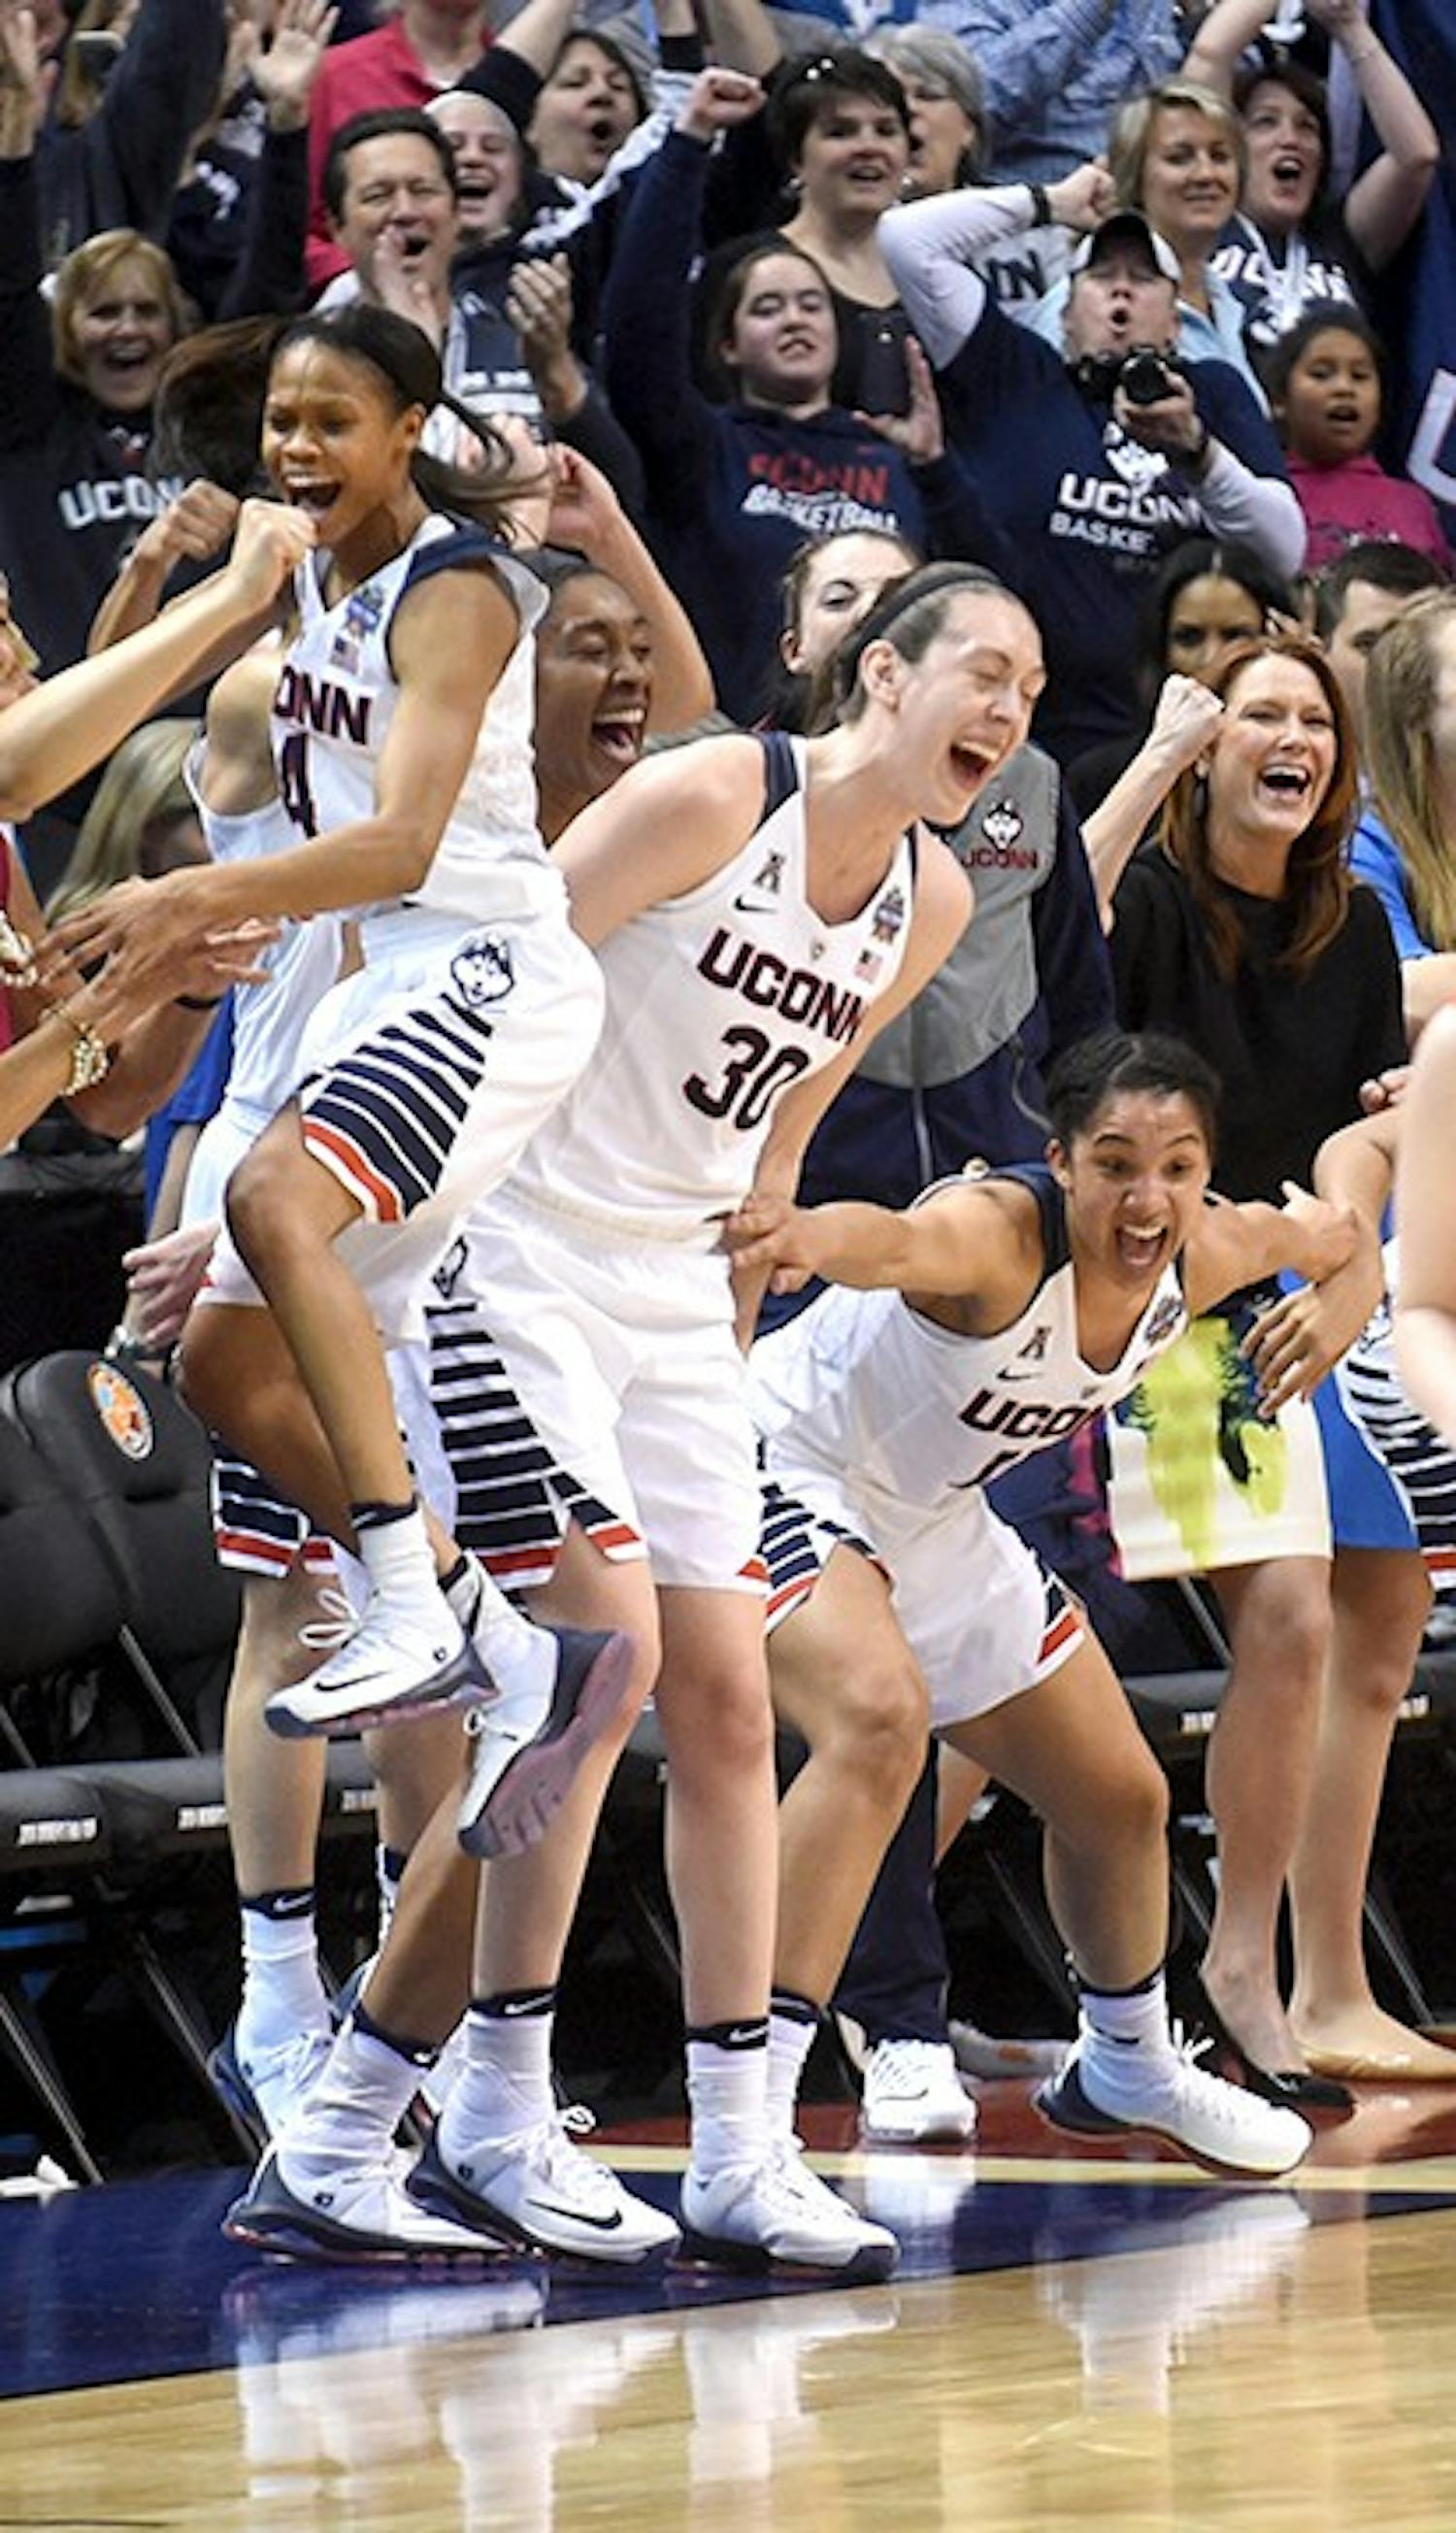 Connecticut Huskies players Moriah Jefferson, from left, Breanna Stewart, Morgan Tuck and Gabby Williams celebrate a basket on Tuesday, April 5, 2016, at Bankers Life Fieldhouse in Indianapolis. (Brad Horrigan/Hartford Courant/TNS)